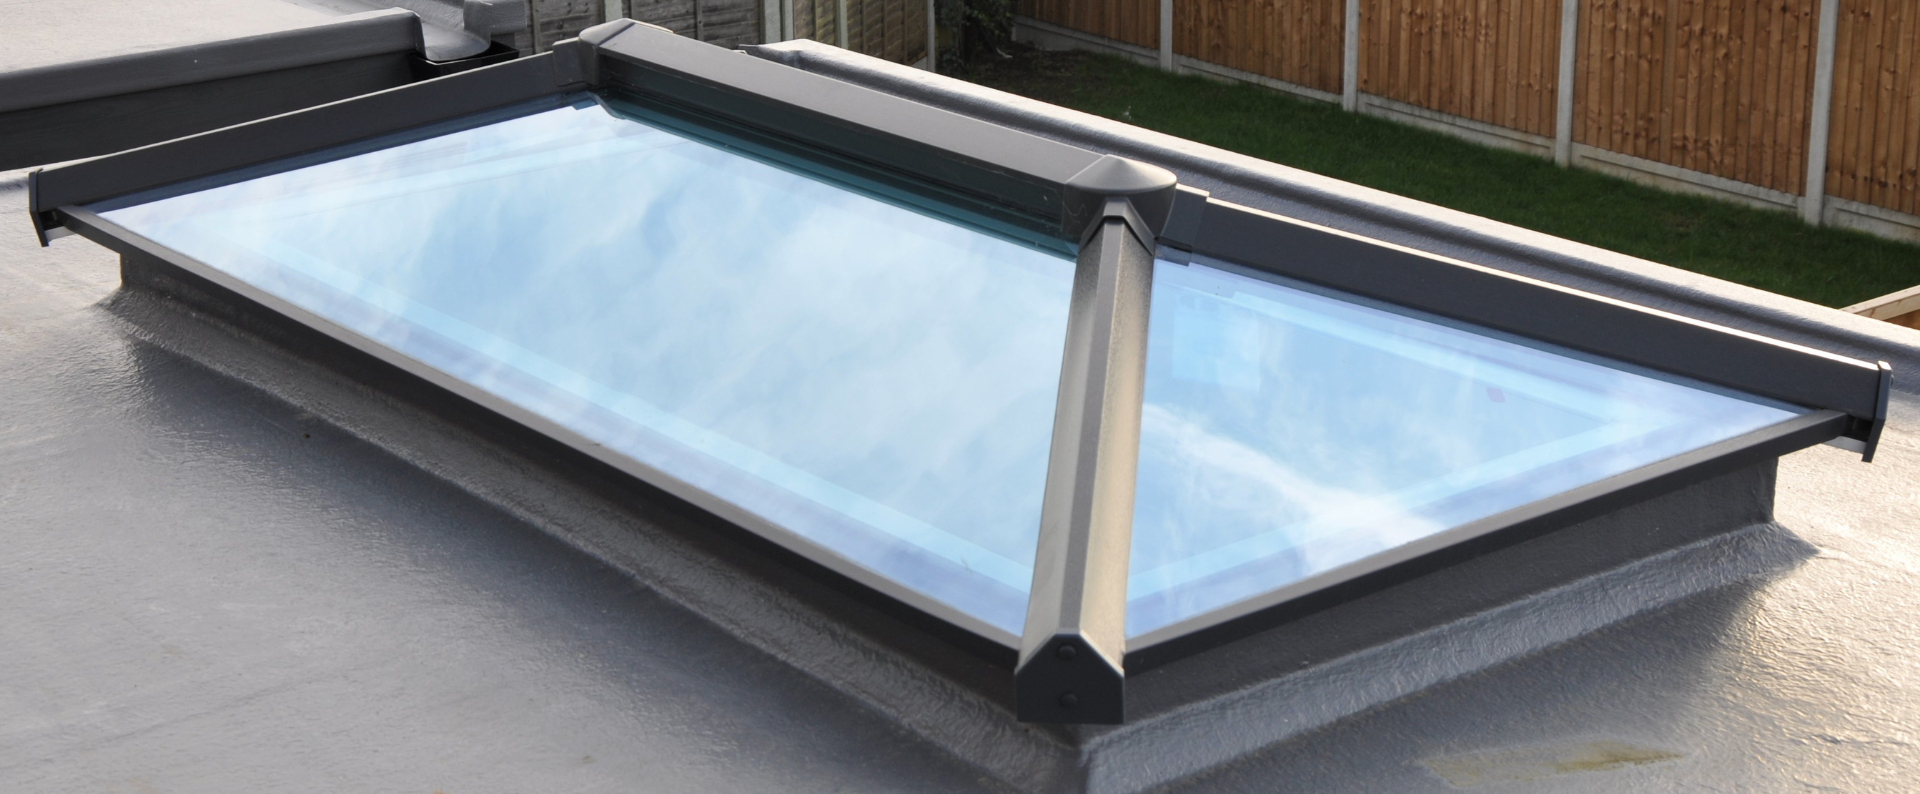 The Benefits Of Roof Lanterns